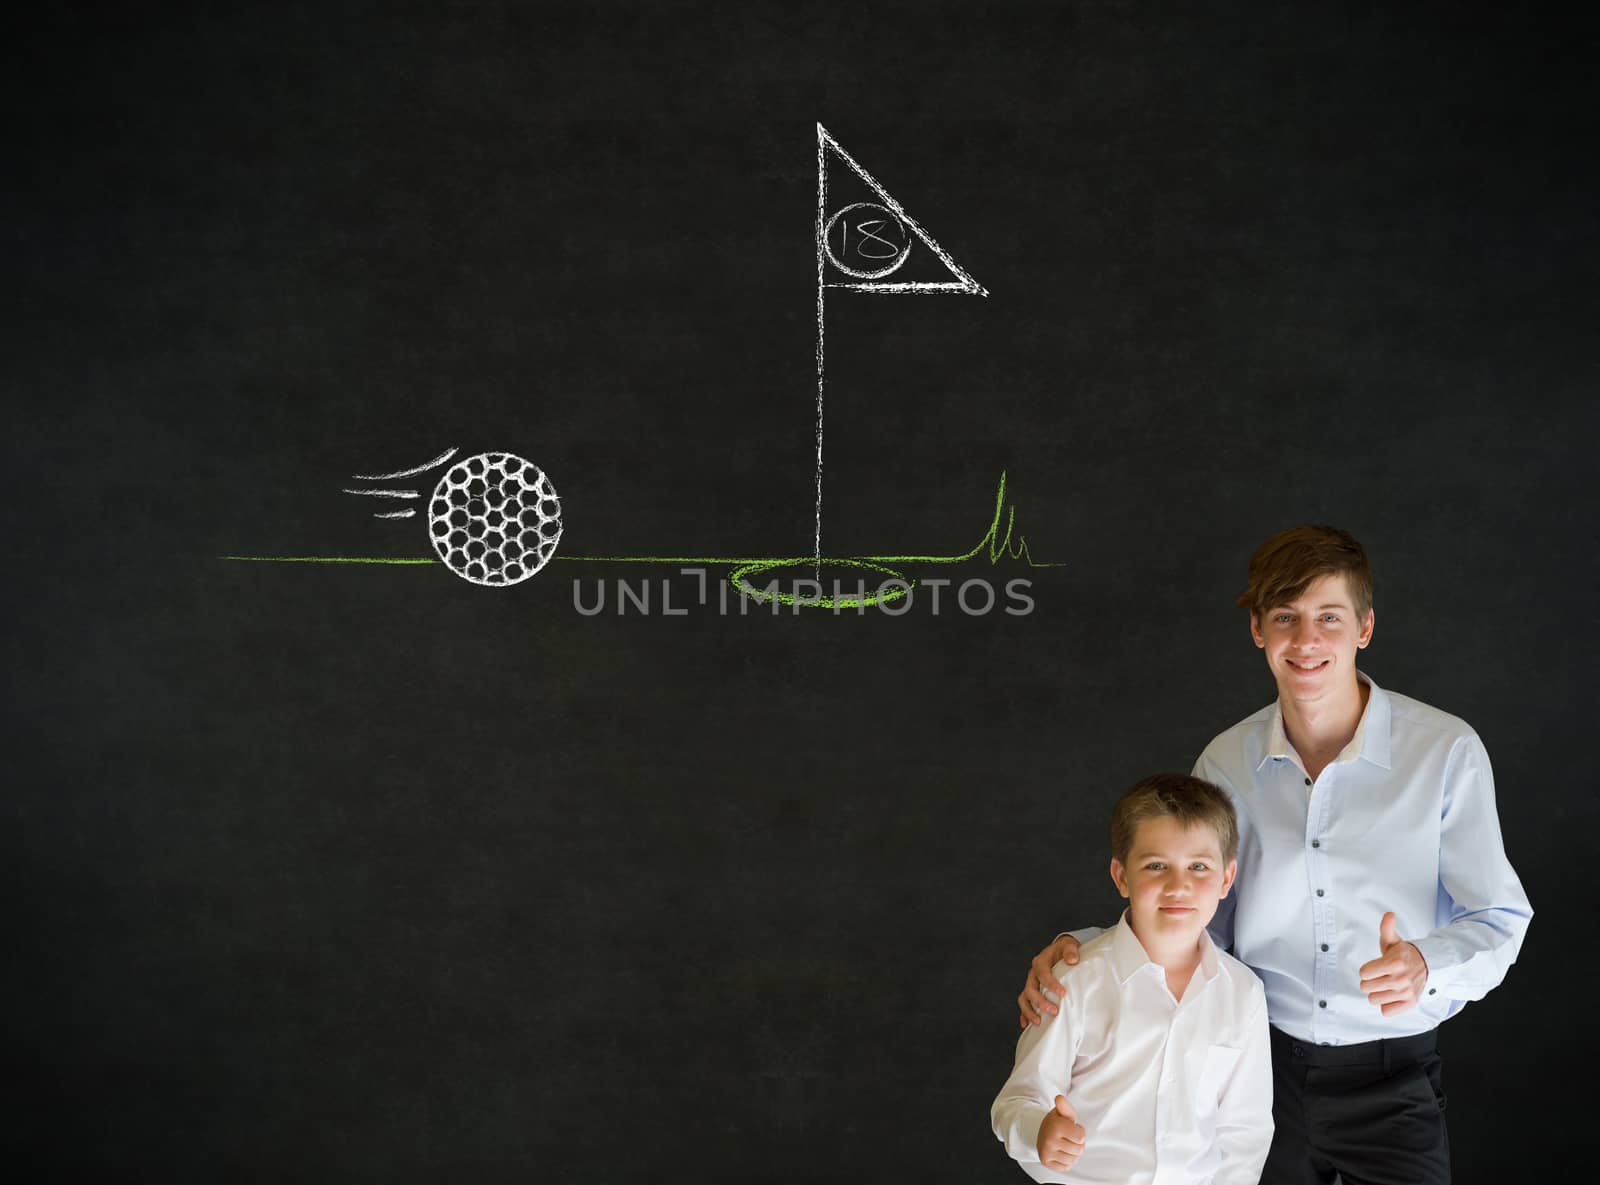 Thumbs up boy dressed up as business man with teacher man and chalk golf ball flag green on blackboard background